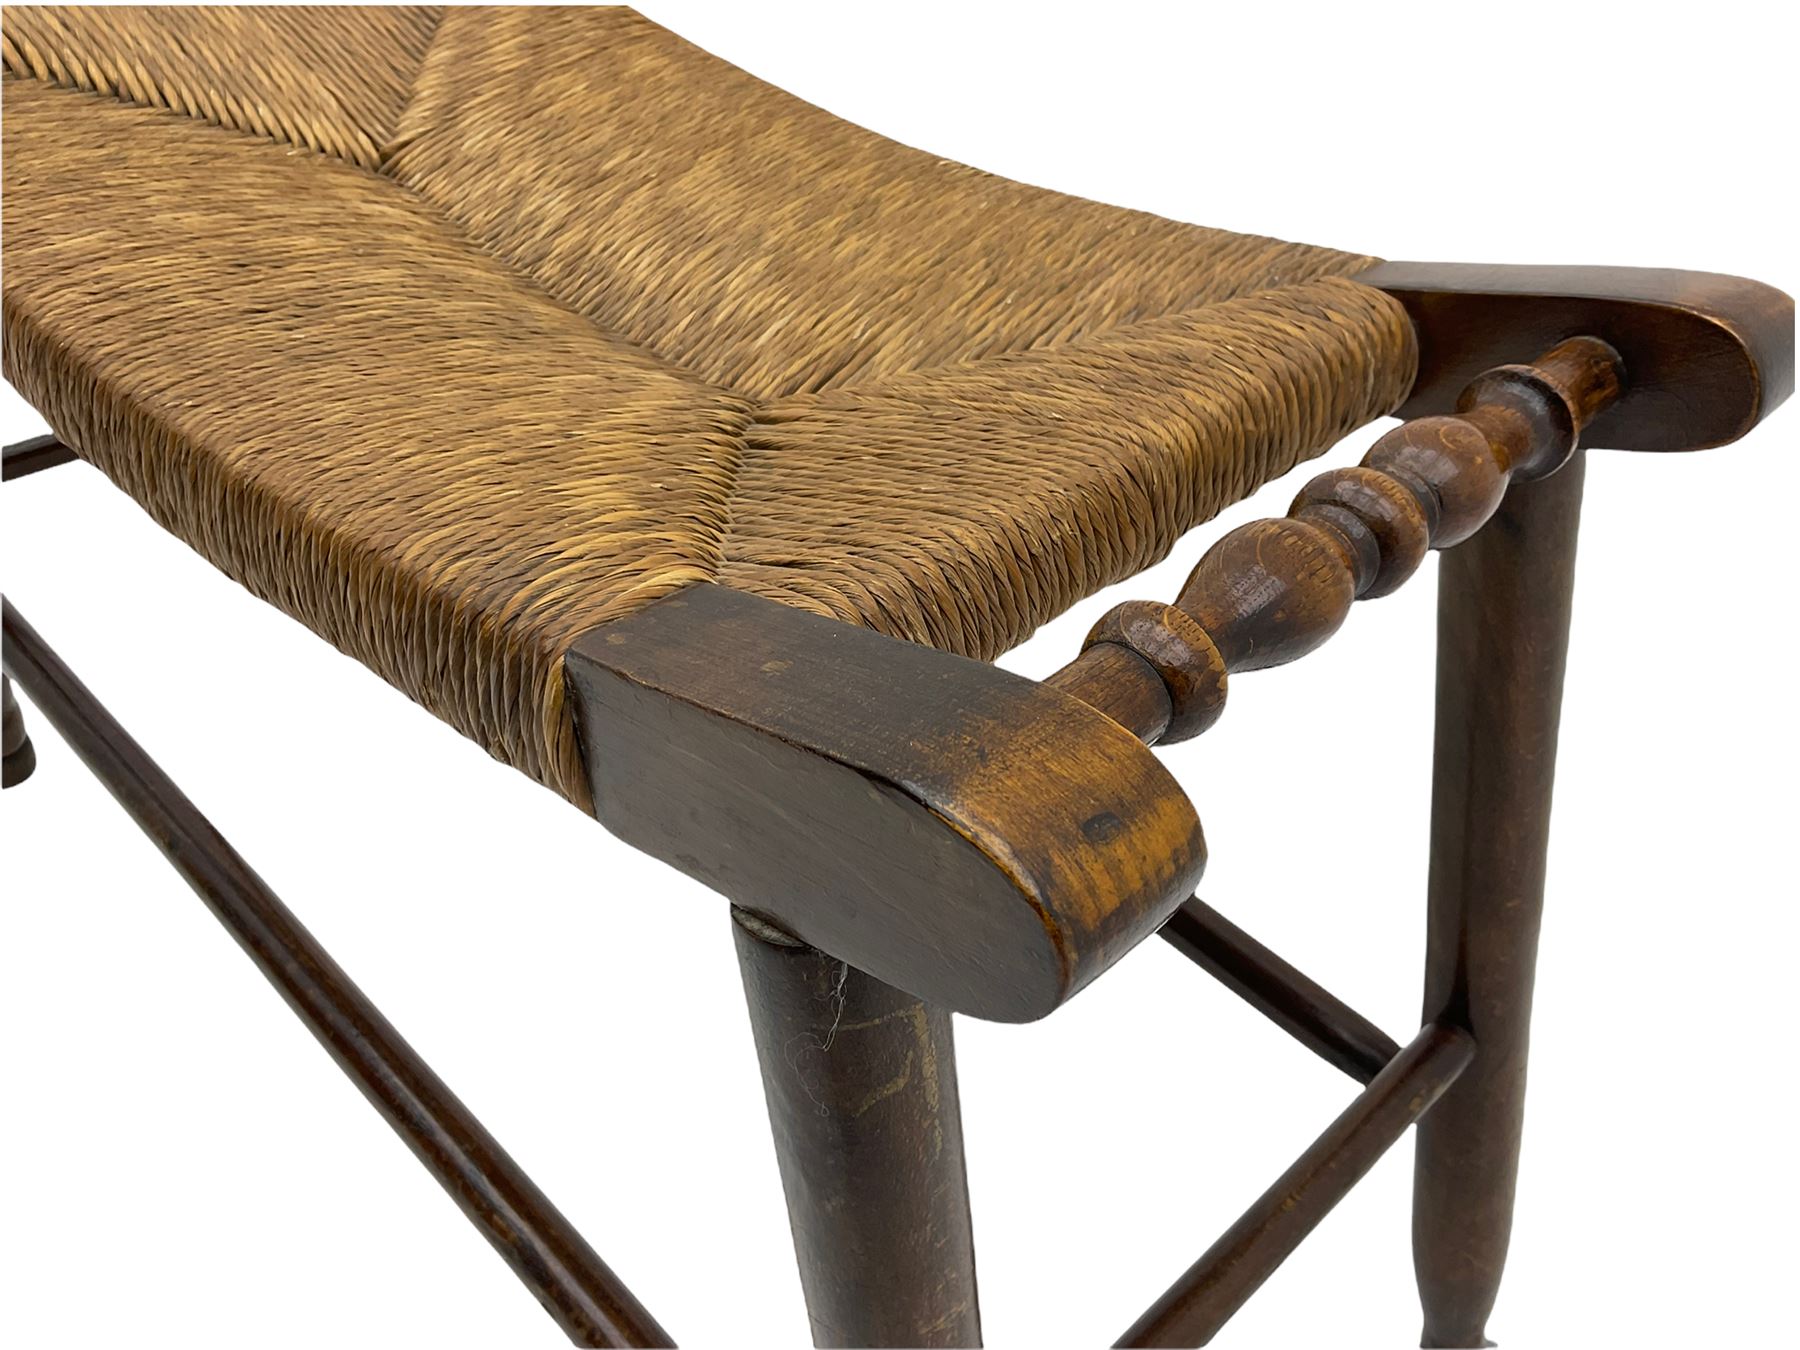 20th century stained beech stool with dished rush seat - Image 5 of 6